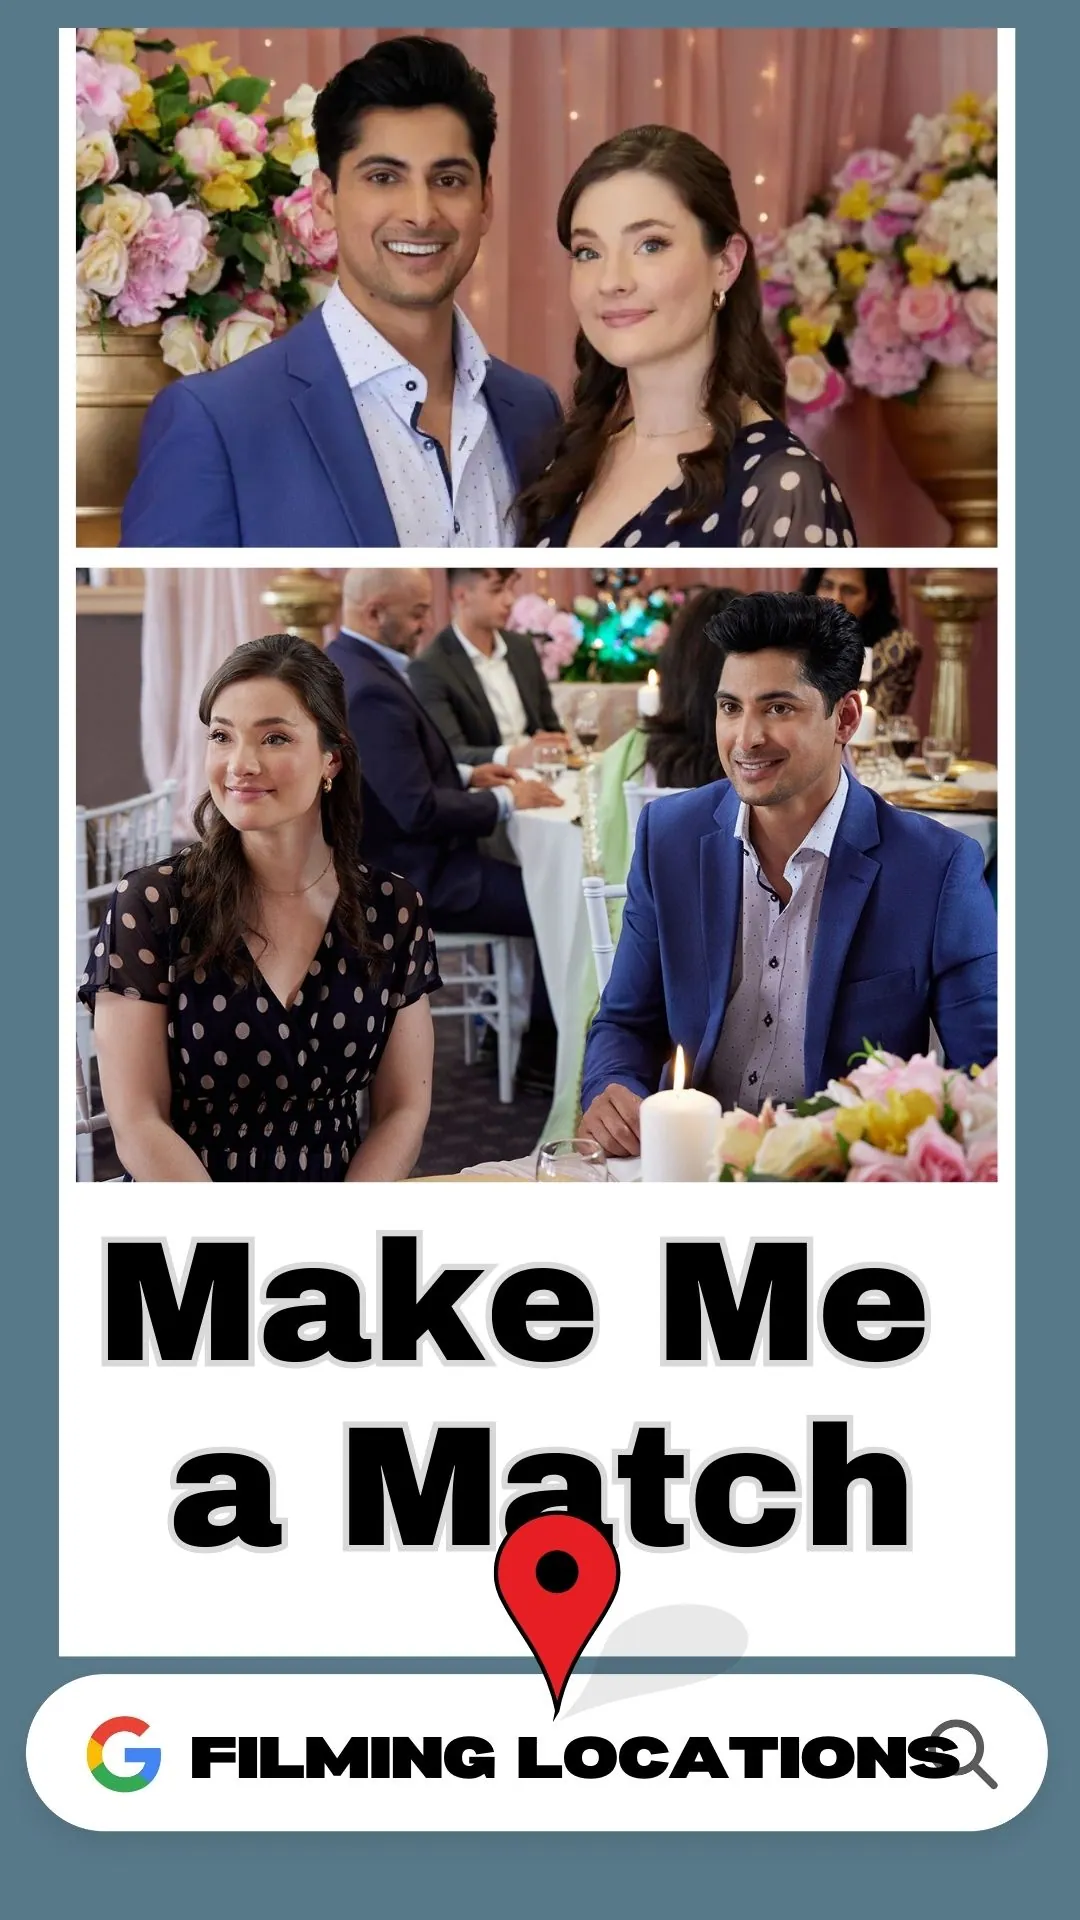 Make Me a Match Filming Location